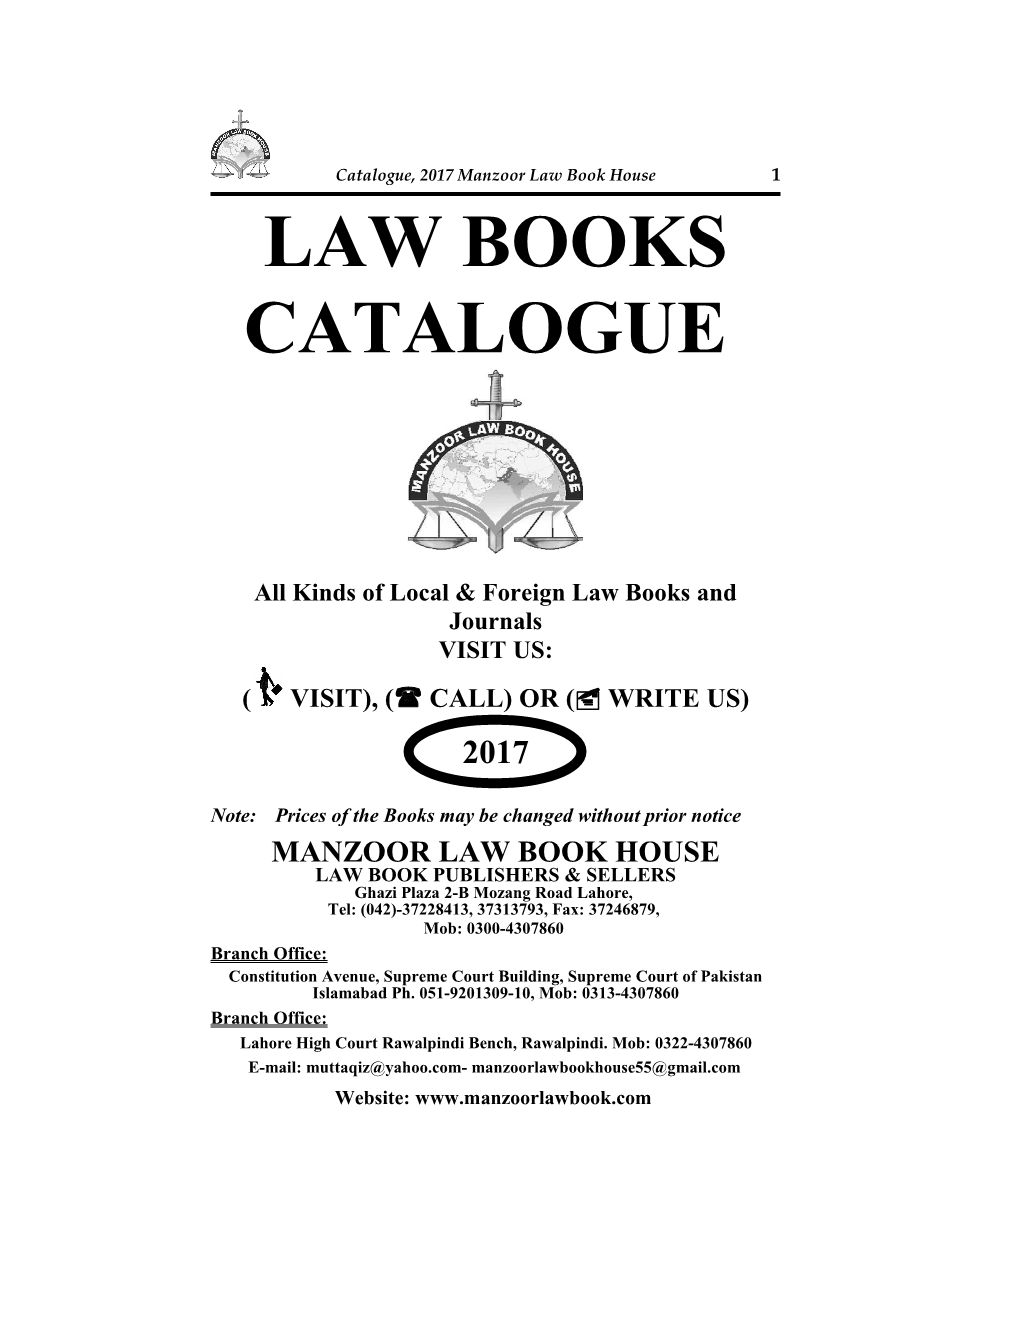 Pioneer of Law Book Publishers in Pakistan CATALOGUE